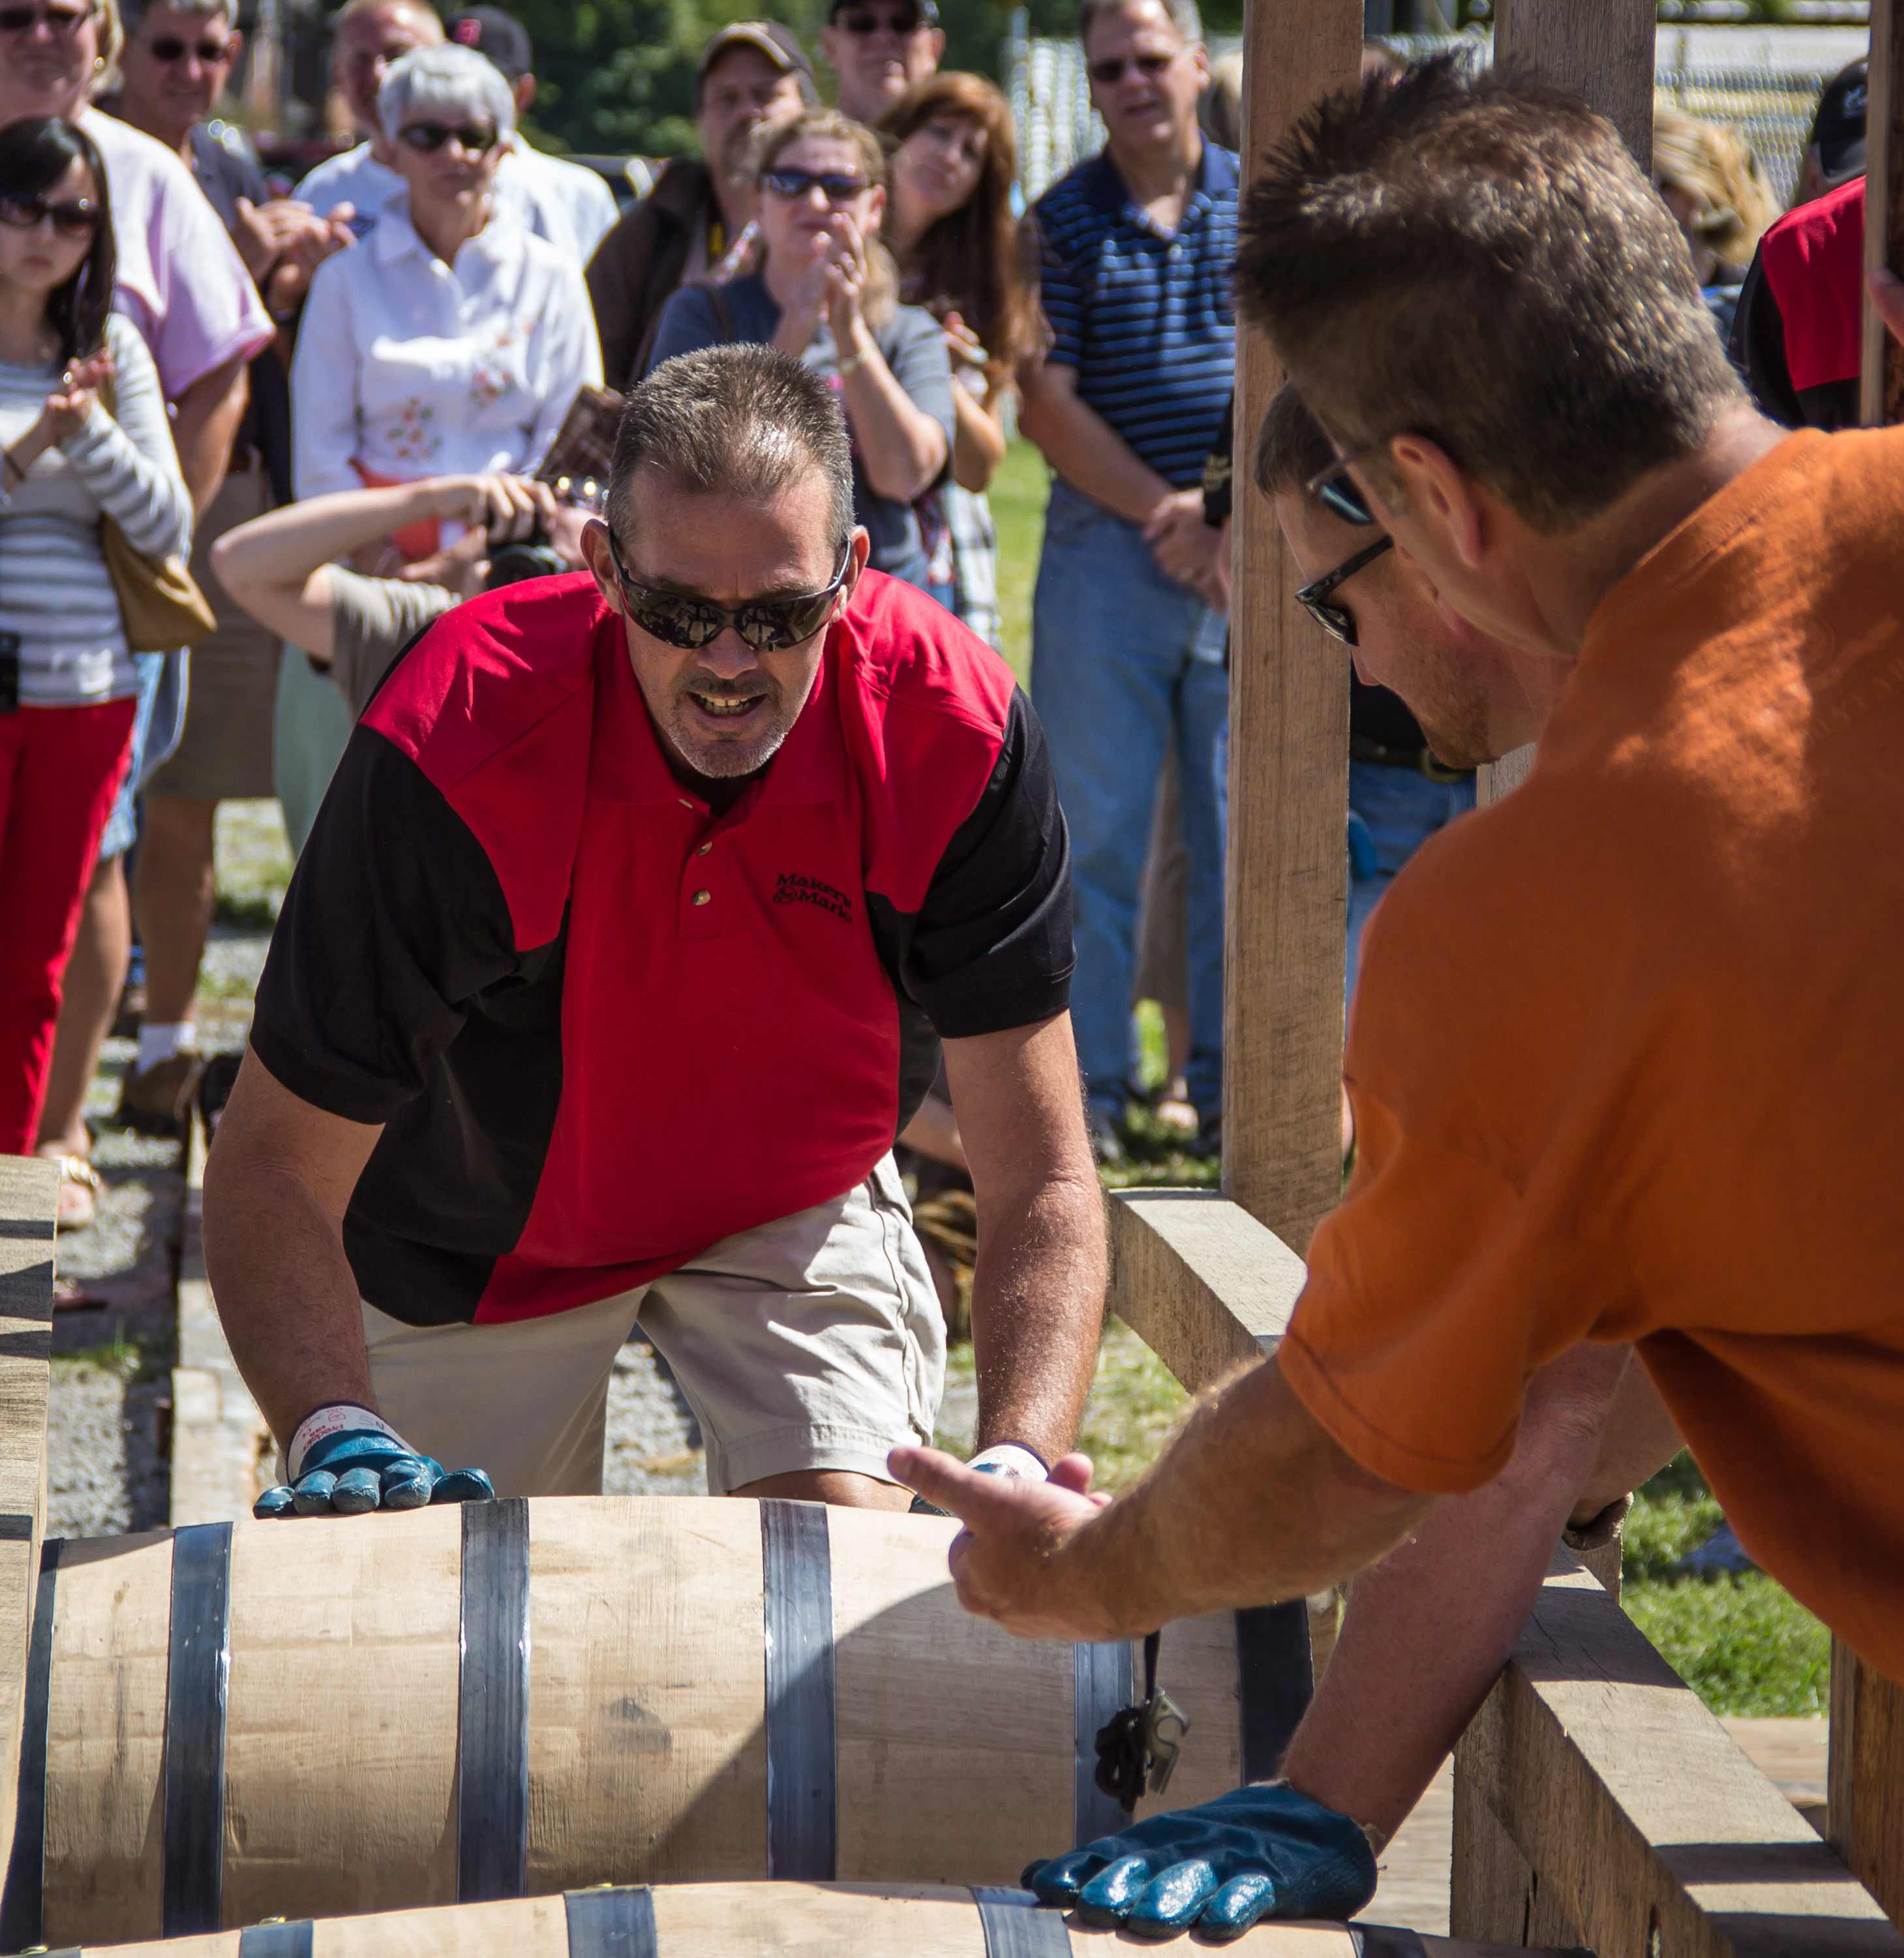 Members of the Maker's Mark team compete in the 2012 World Championship Bourbon Barrel Relay at the Kentucky Bourbon Festival in Bardstown, Kentucky.